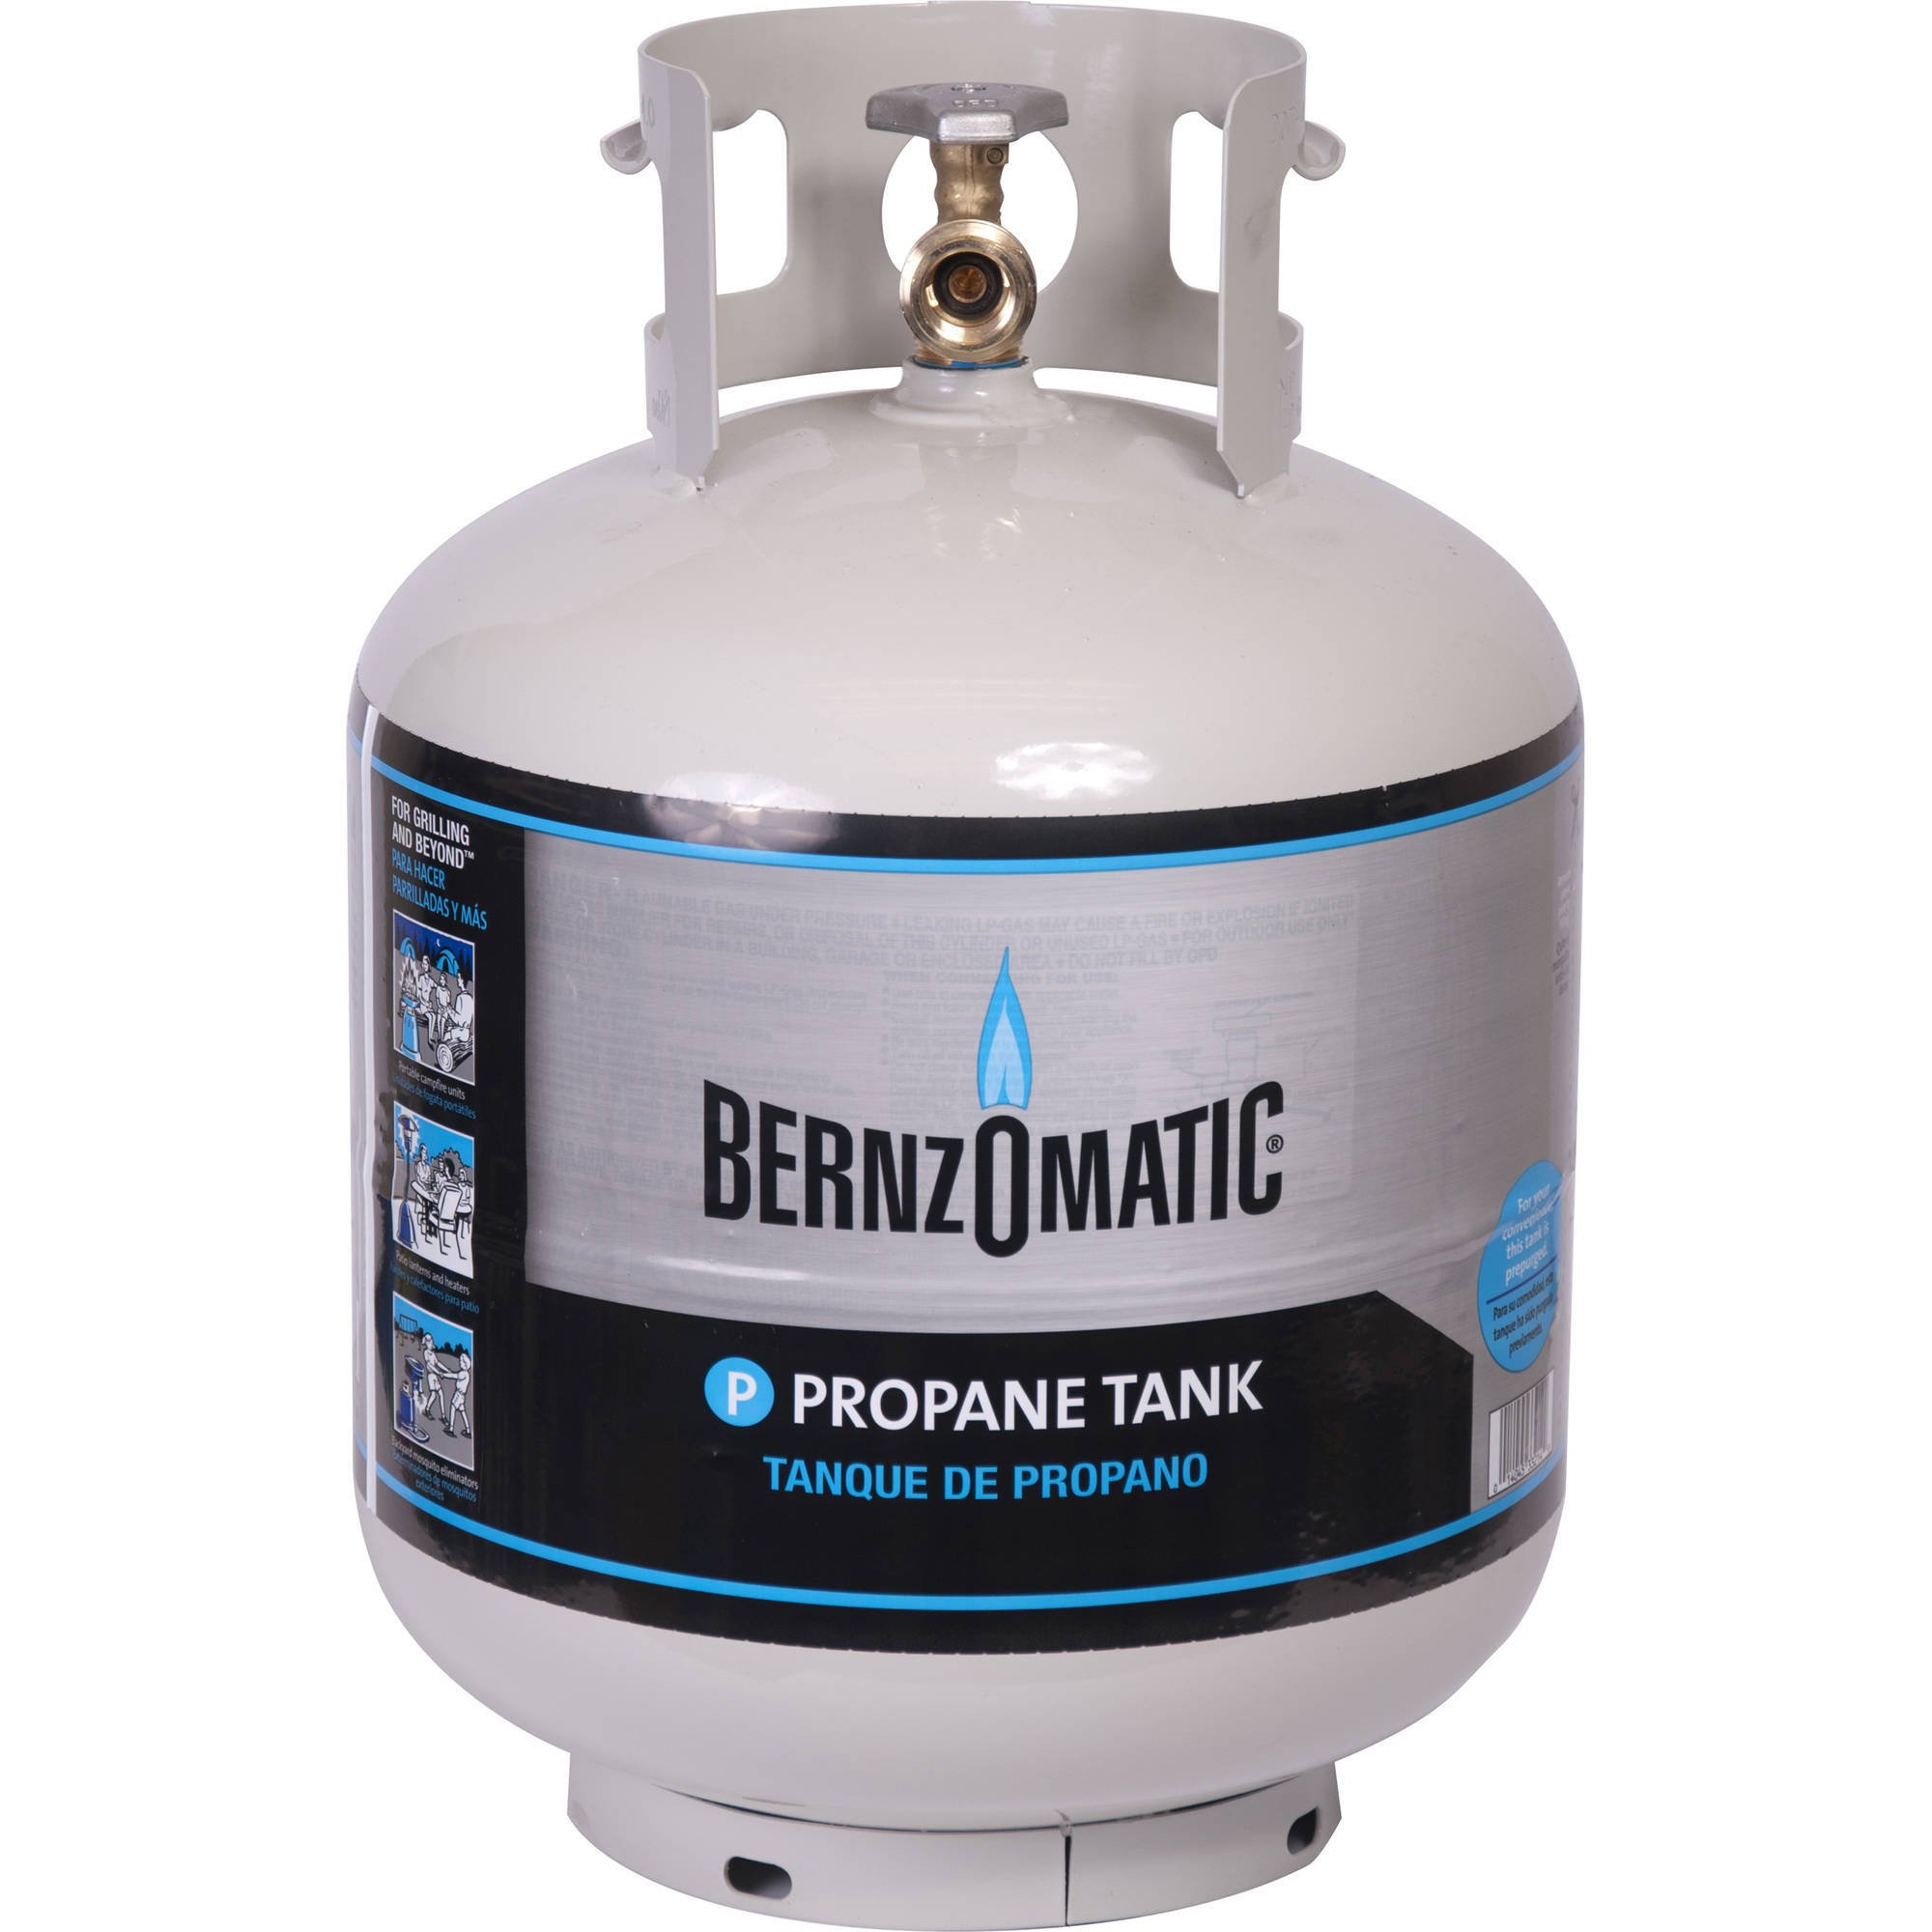 20lb propane tank $21 at Wal-Mart for BBQ grills, patio heaters, RVs ...